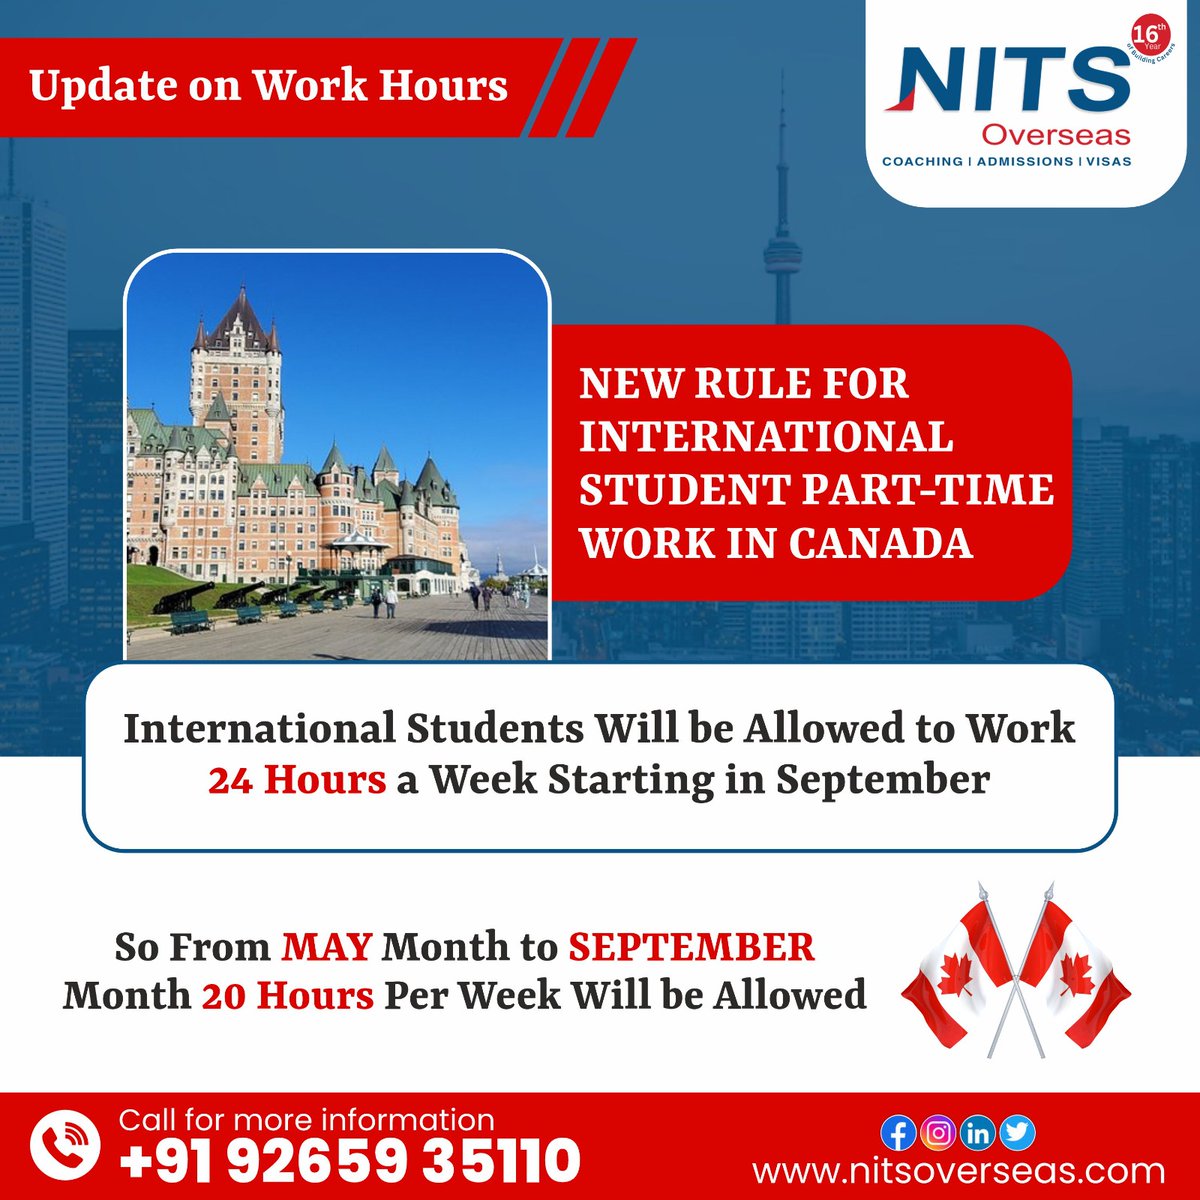 📢 Good news for international students in Canada!
The new rule allows 24 hours of work per week starting in September. Make sure to follow the guidelines for May to September where 20 hours per week are permitted.
 Please contact us:
+91 9265935110
#nitsoverseas #studyabroad